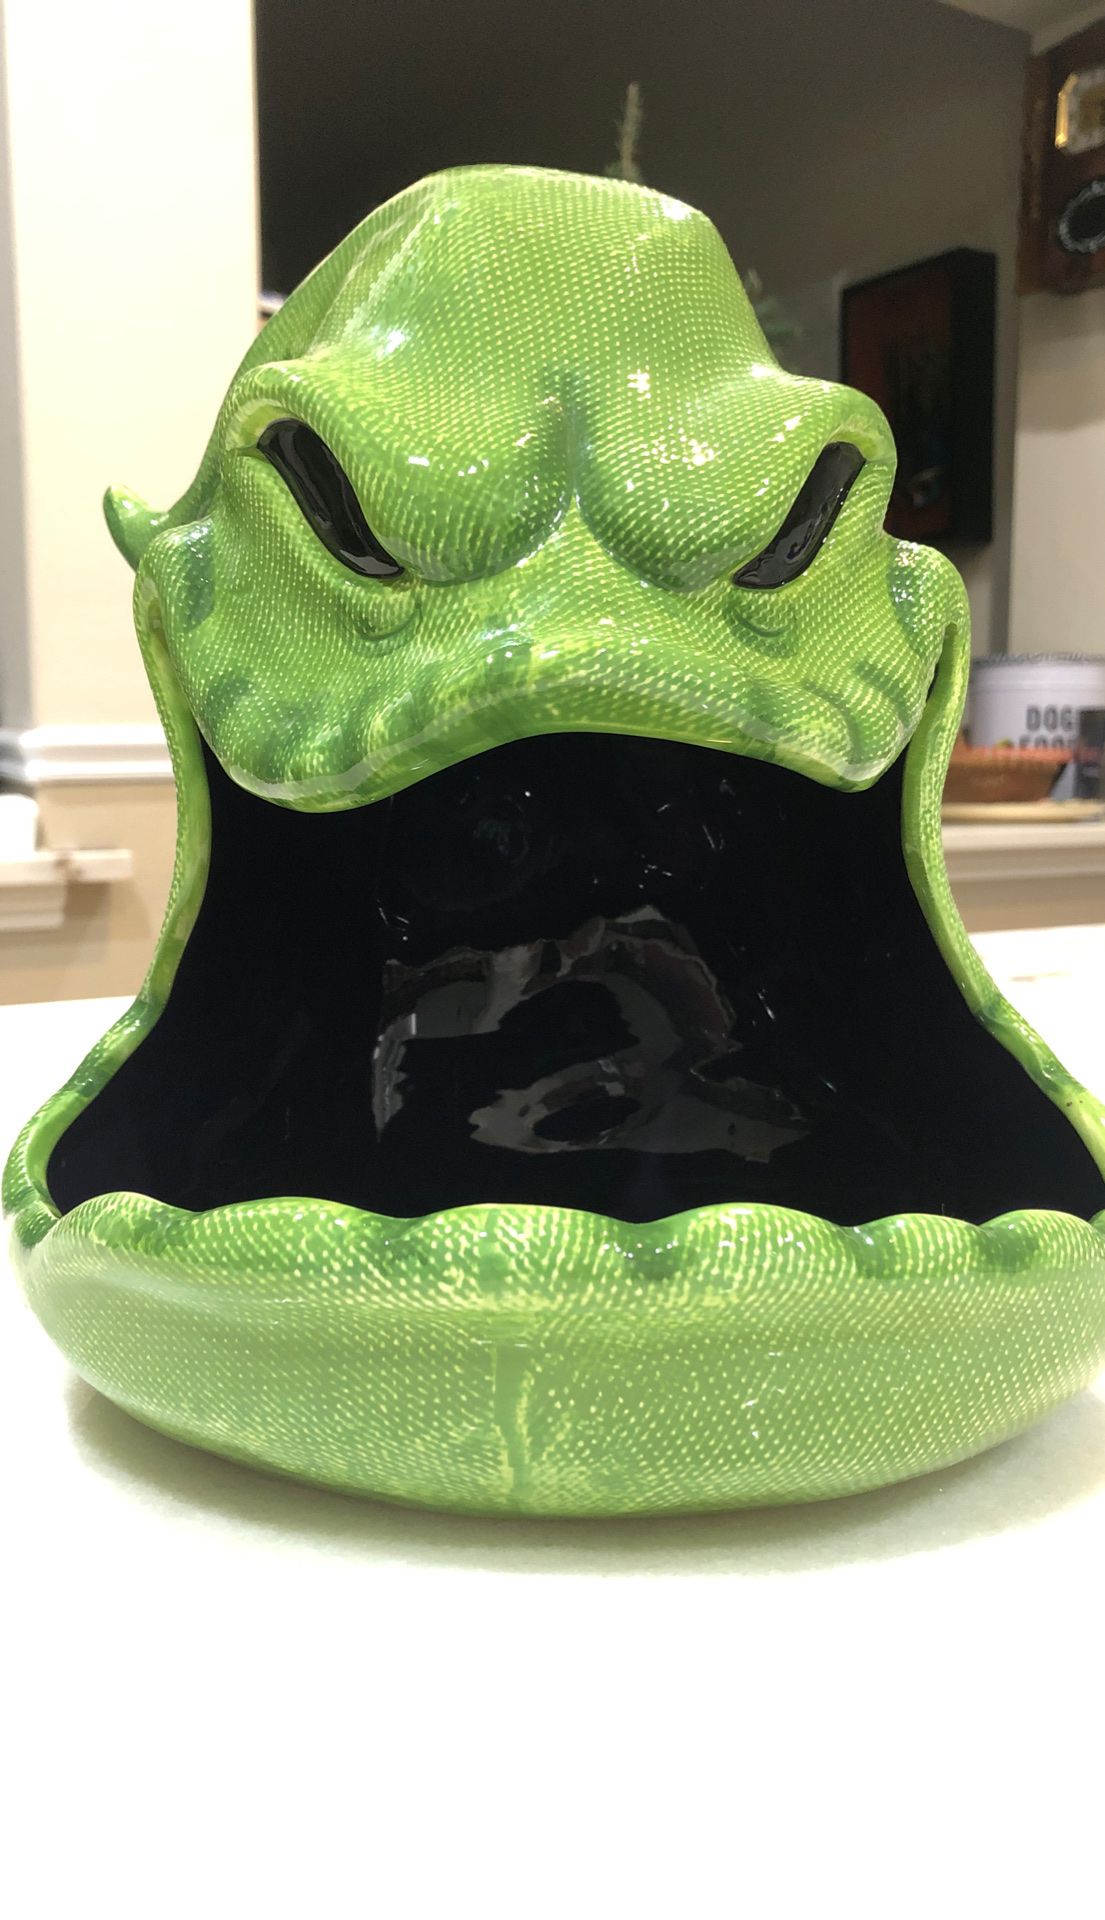 Disney nightmare before christmas RARE OOGIE BOOGIE Candy Bowl